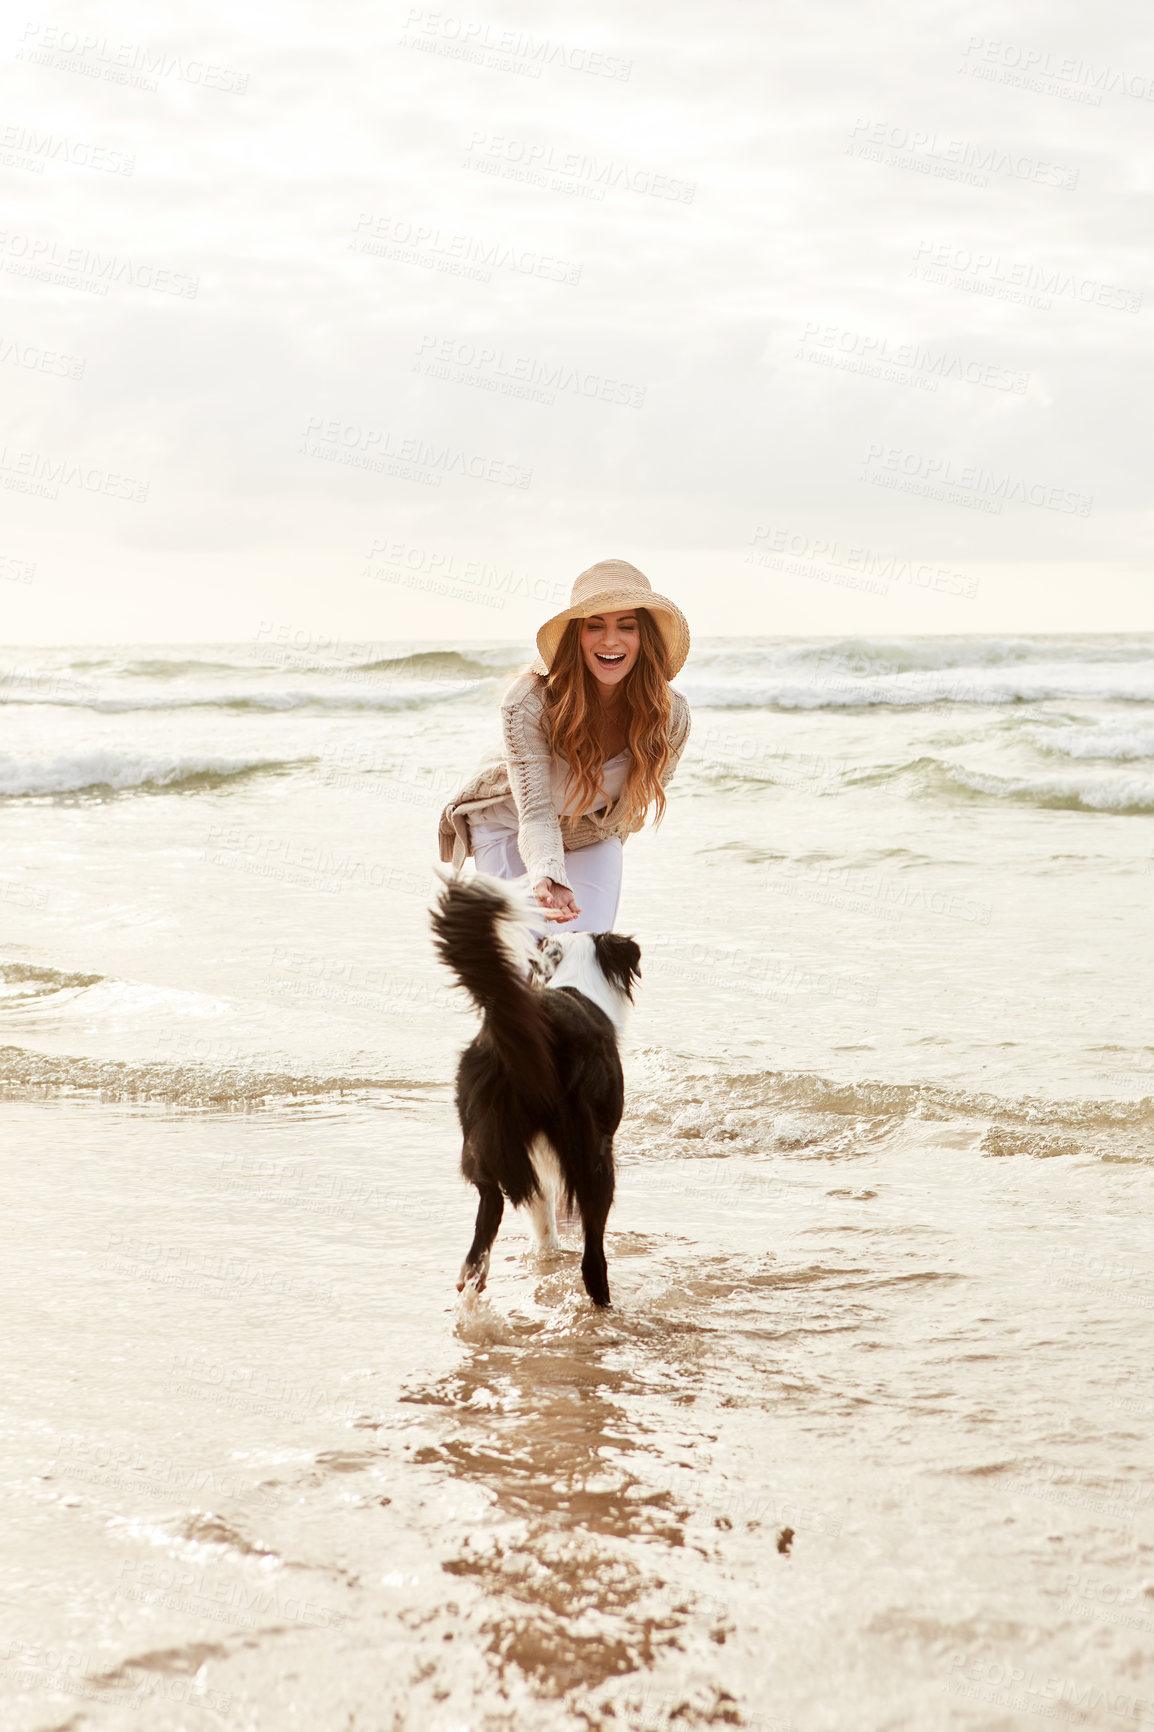 Buy stock photo Shot of a young woman spending some time with her dog at the beach